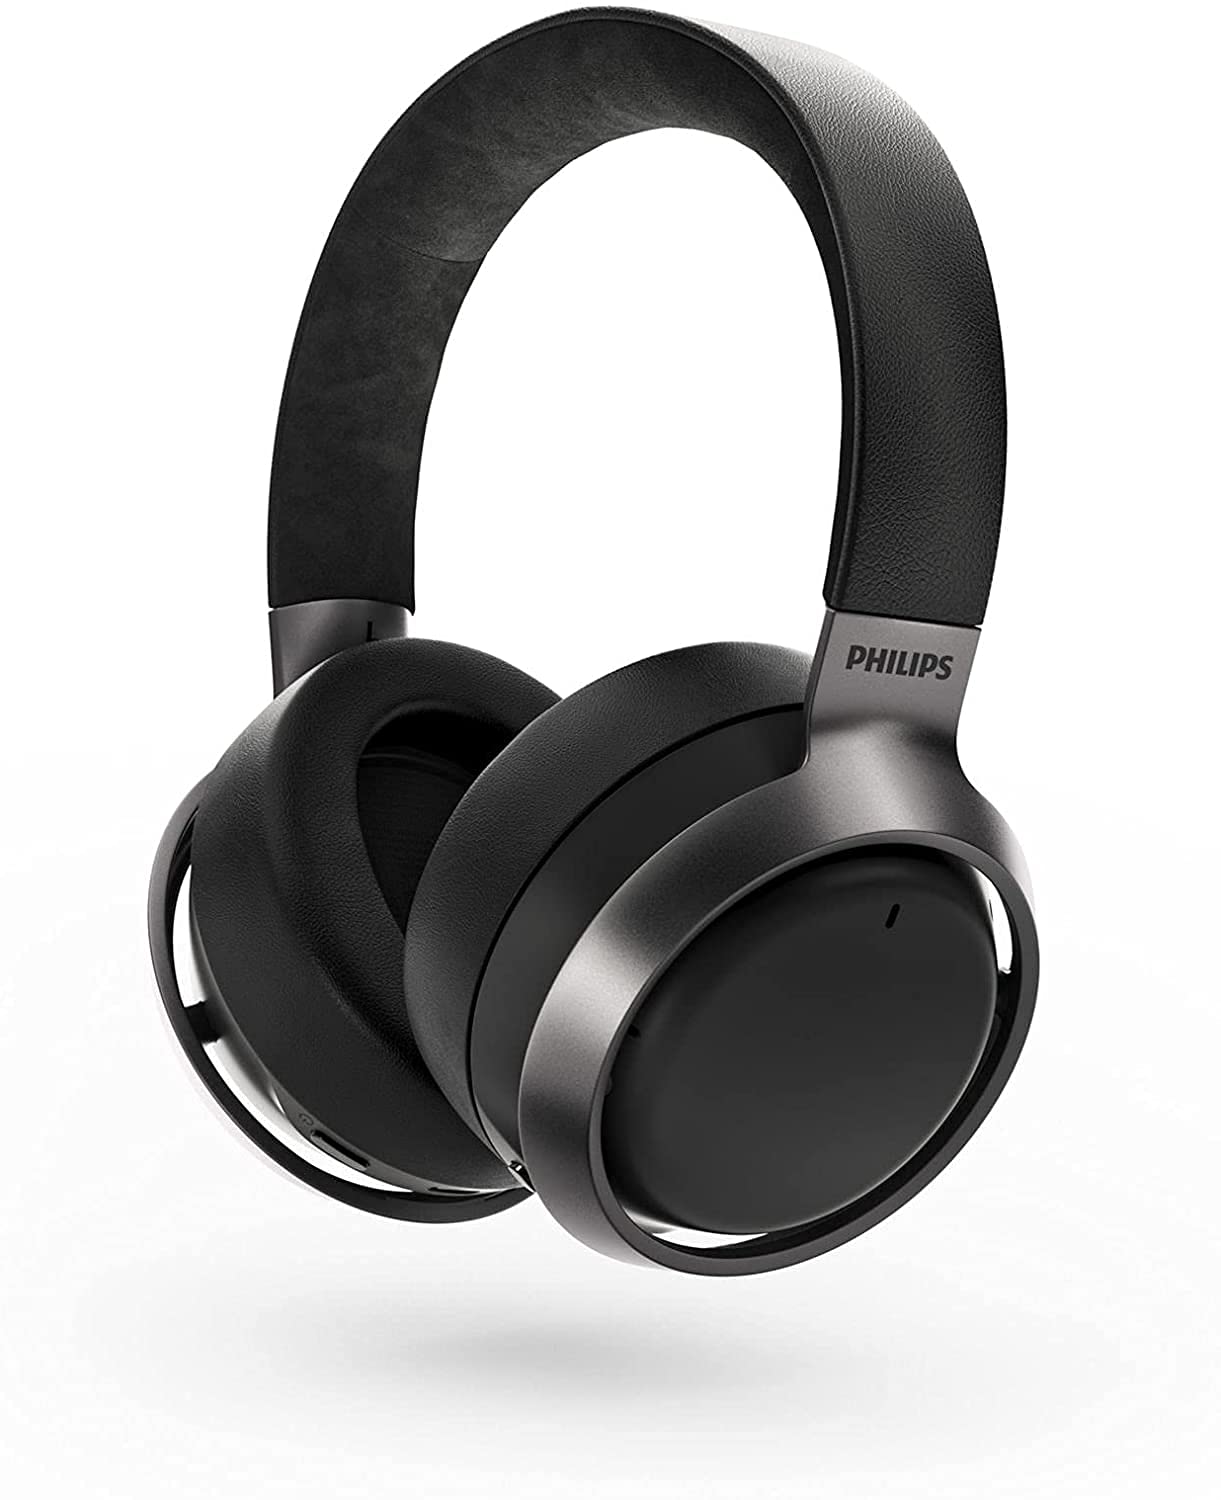 Philips Audio Philips Fidelio L3 Flagship Over-Ear Wireless Headphones with Active Noise Cancellation Pro + (ANC) و Bluetooth Multipoint Connection